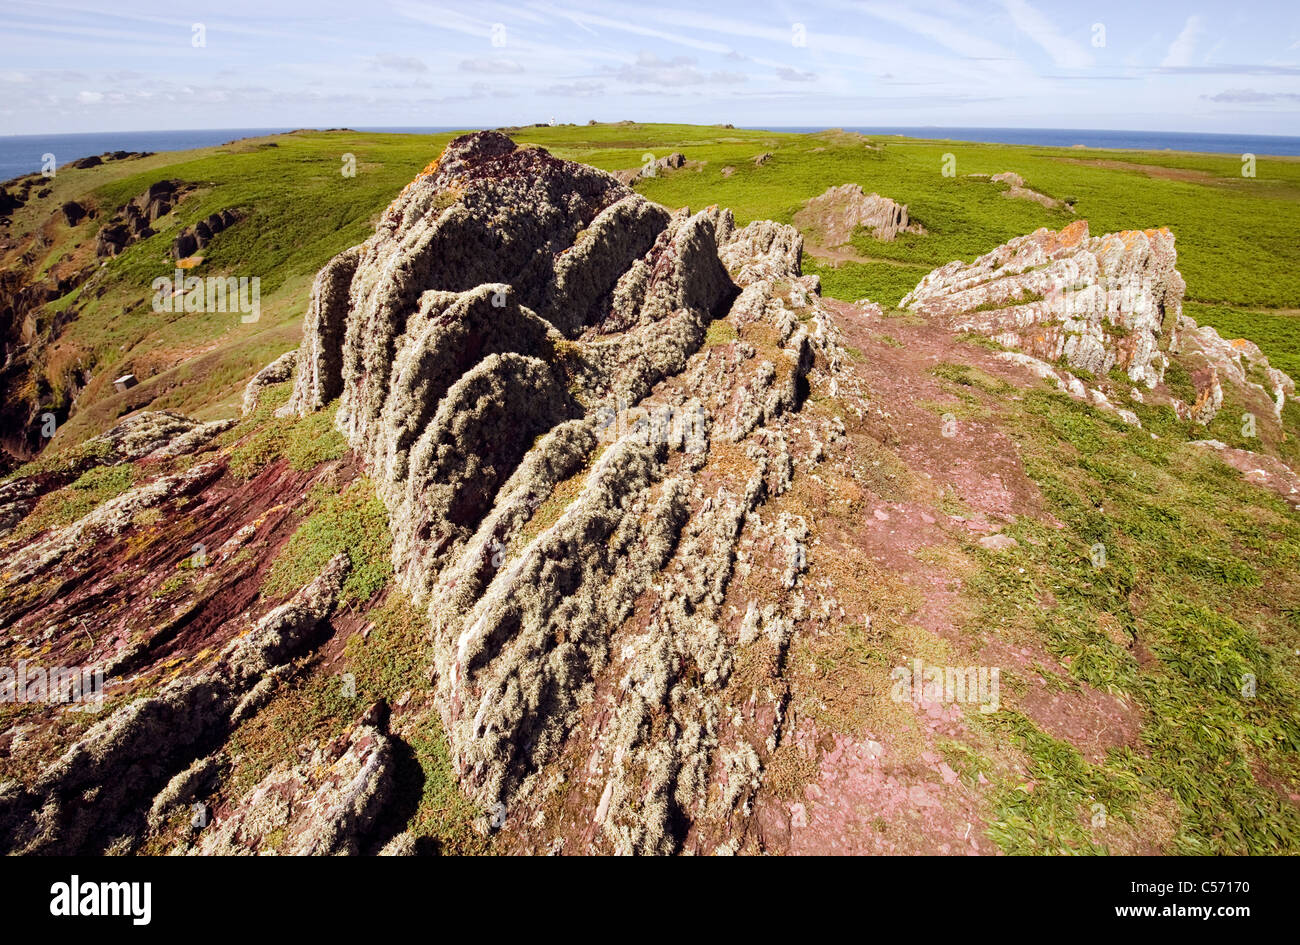 A landscape view of Skokholm island from the top of Spy Rock Stock Photo